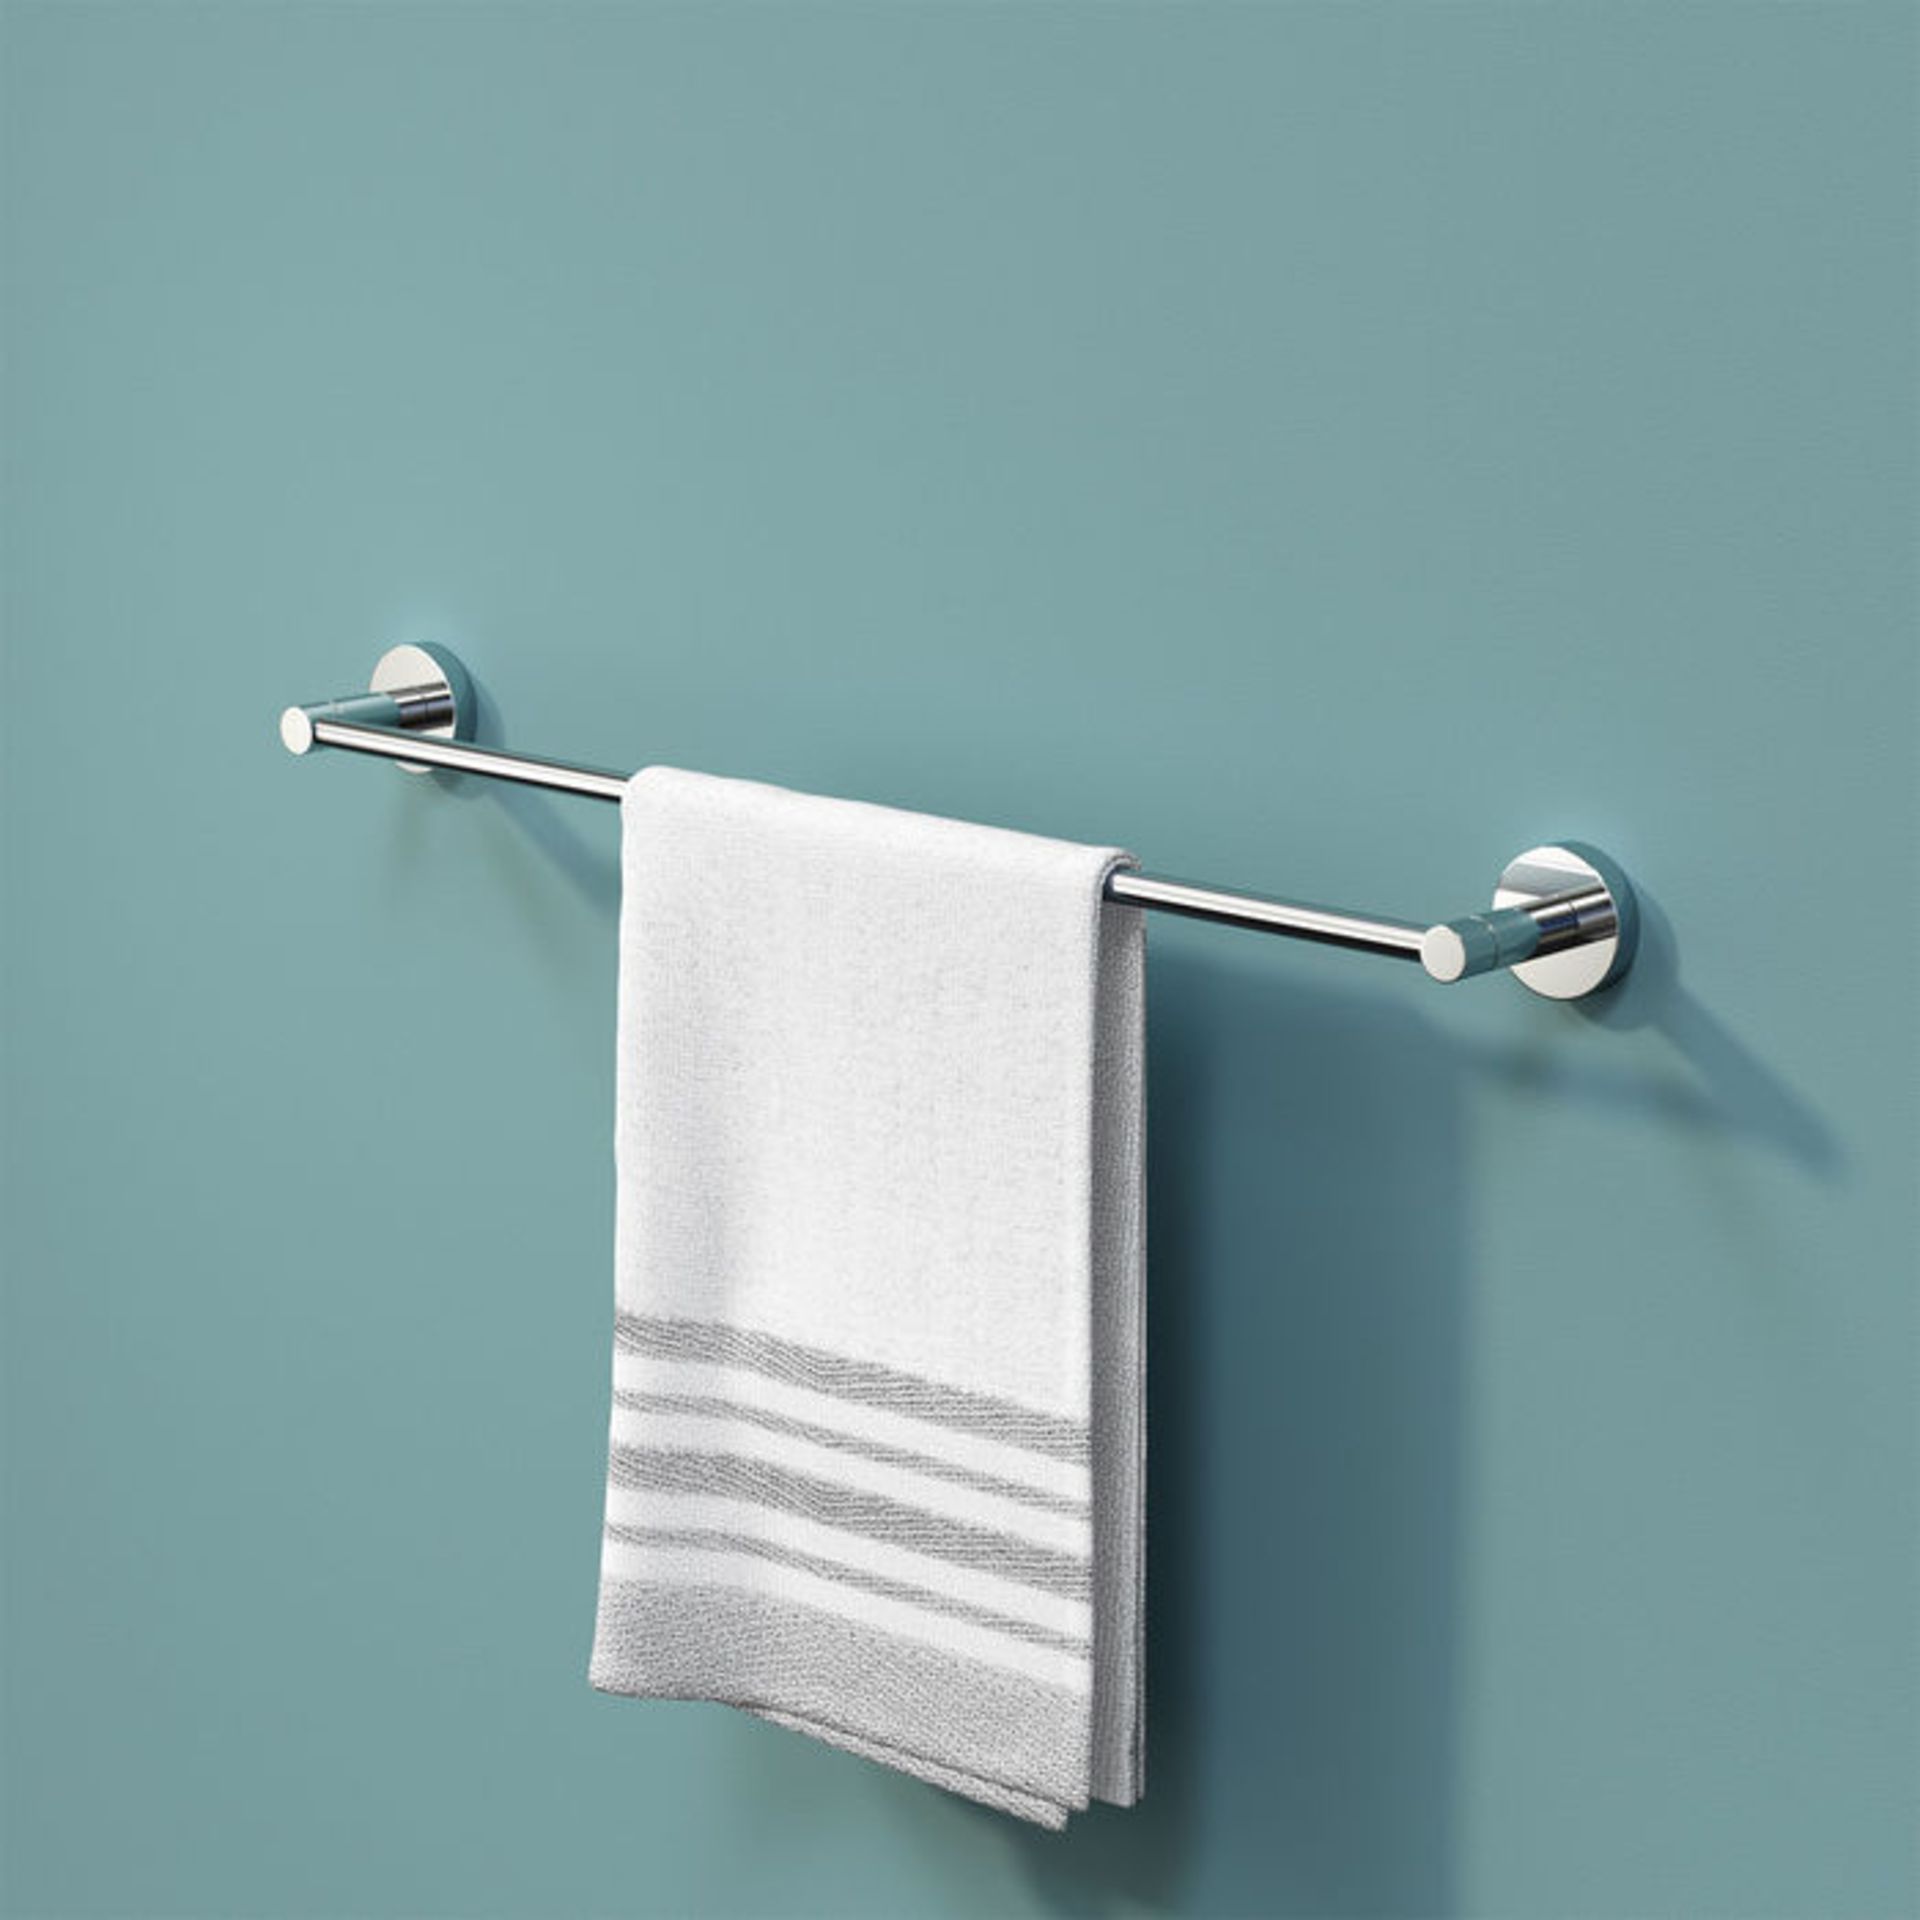 (U1011) Finsbury Towel Rail. Designed to conceal all fittings Completes your bathroom with a l...